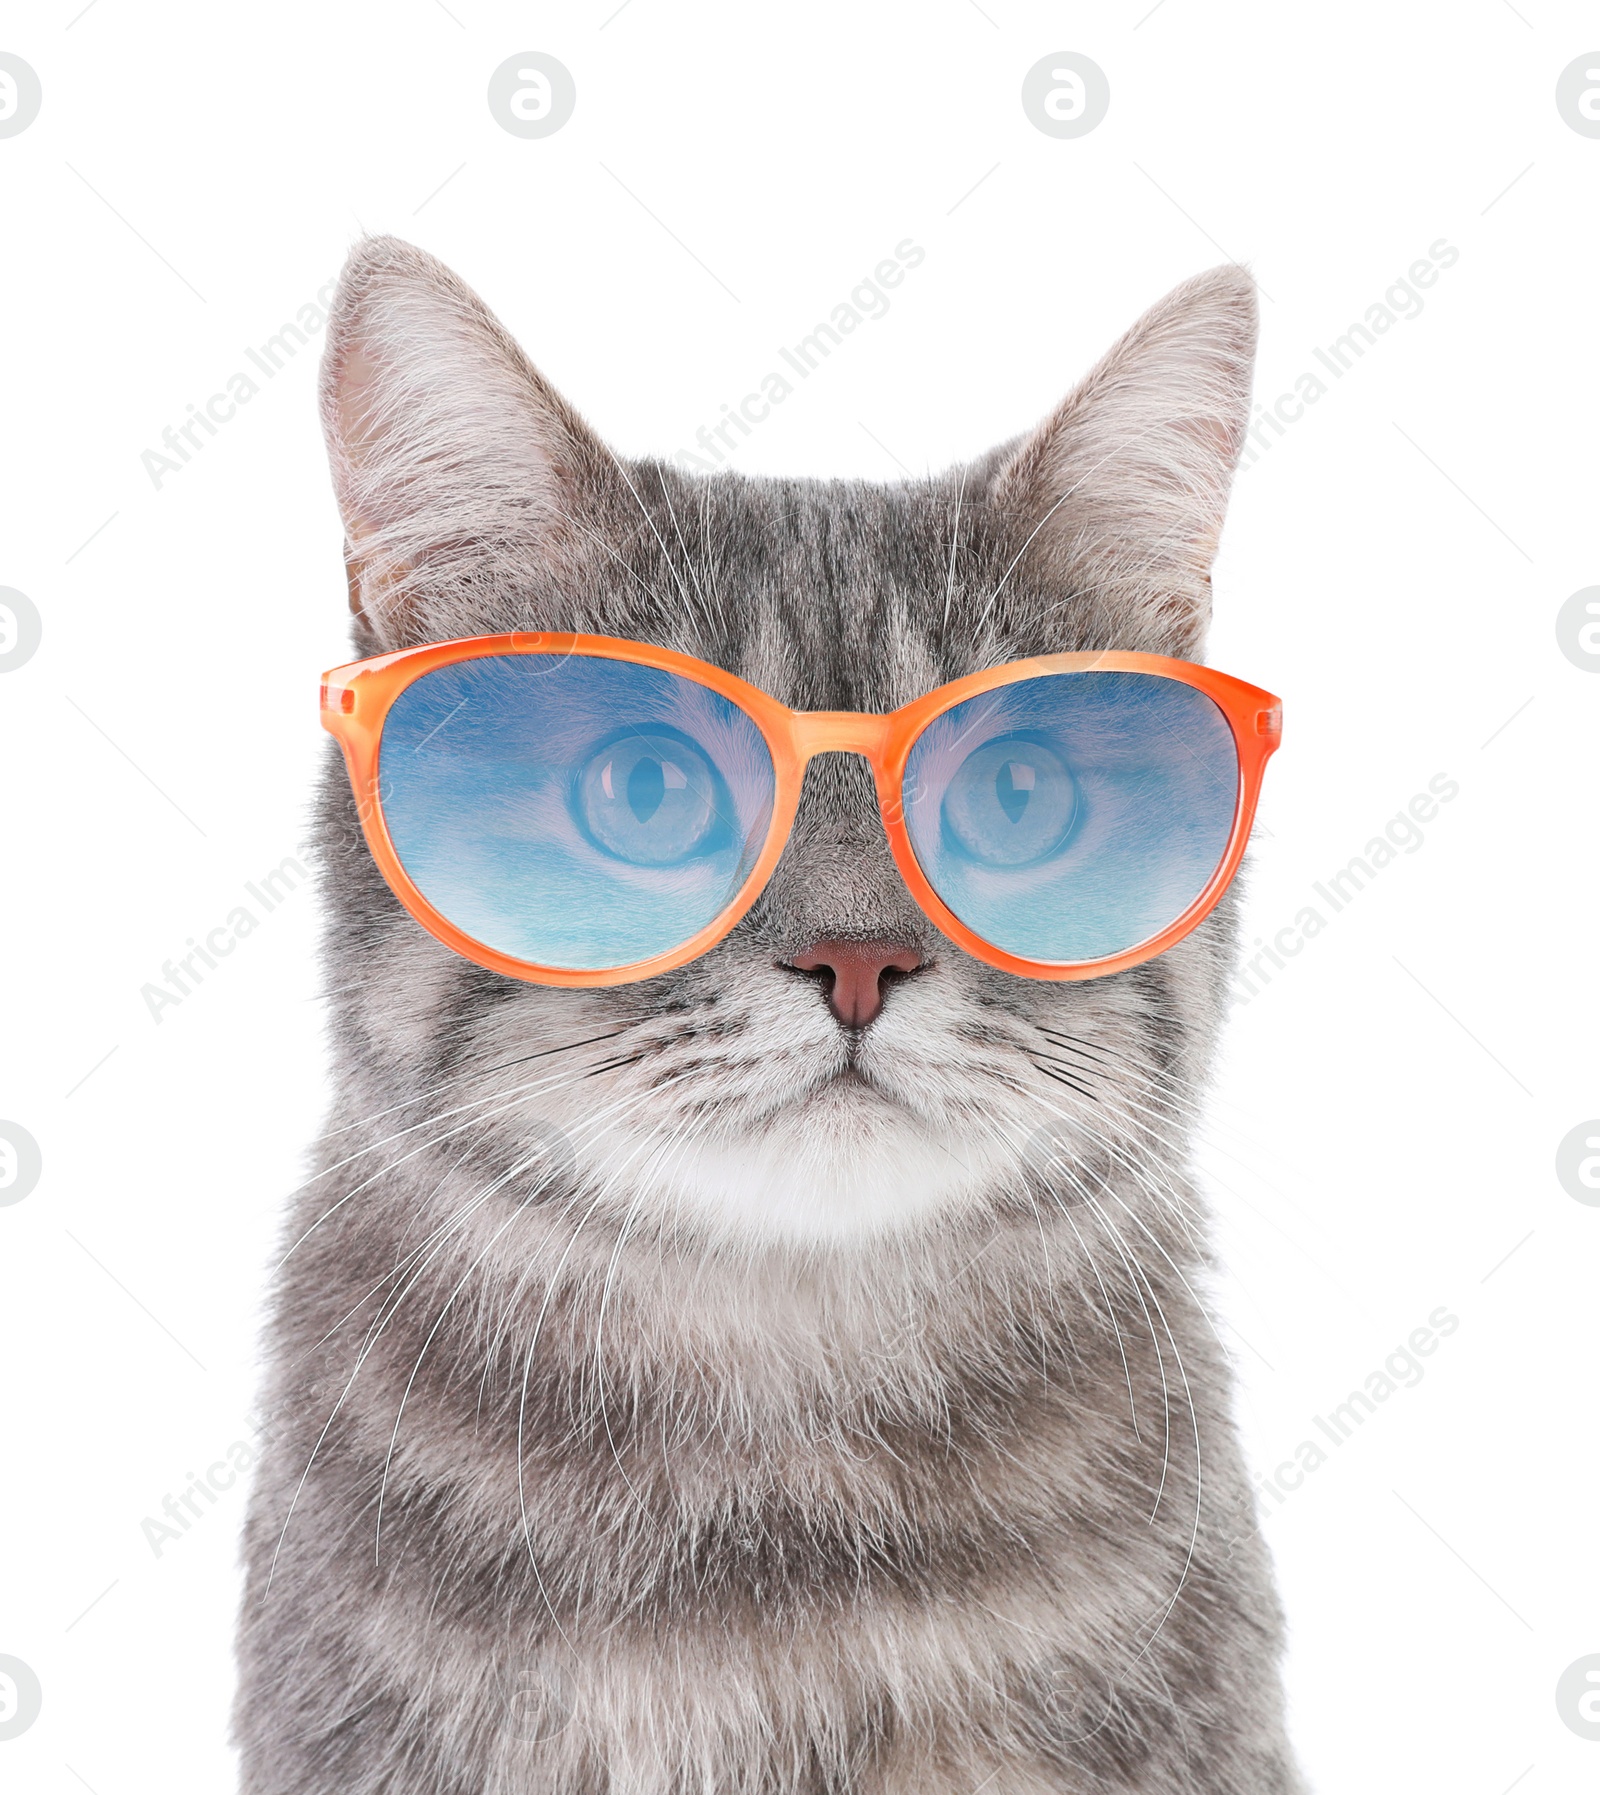 Image of Portrait of gray tabby cat with sunglasses on white background